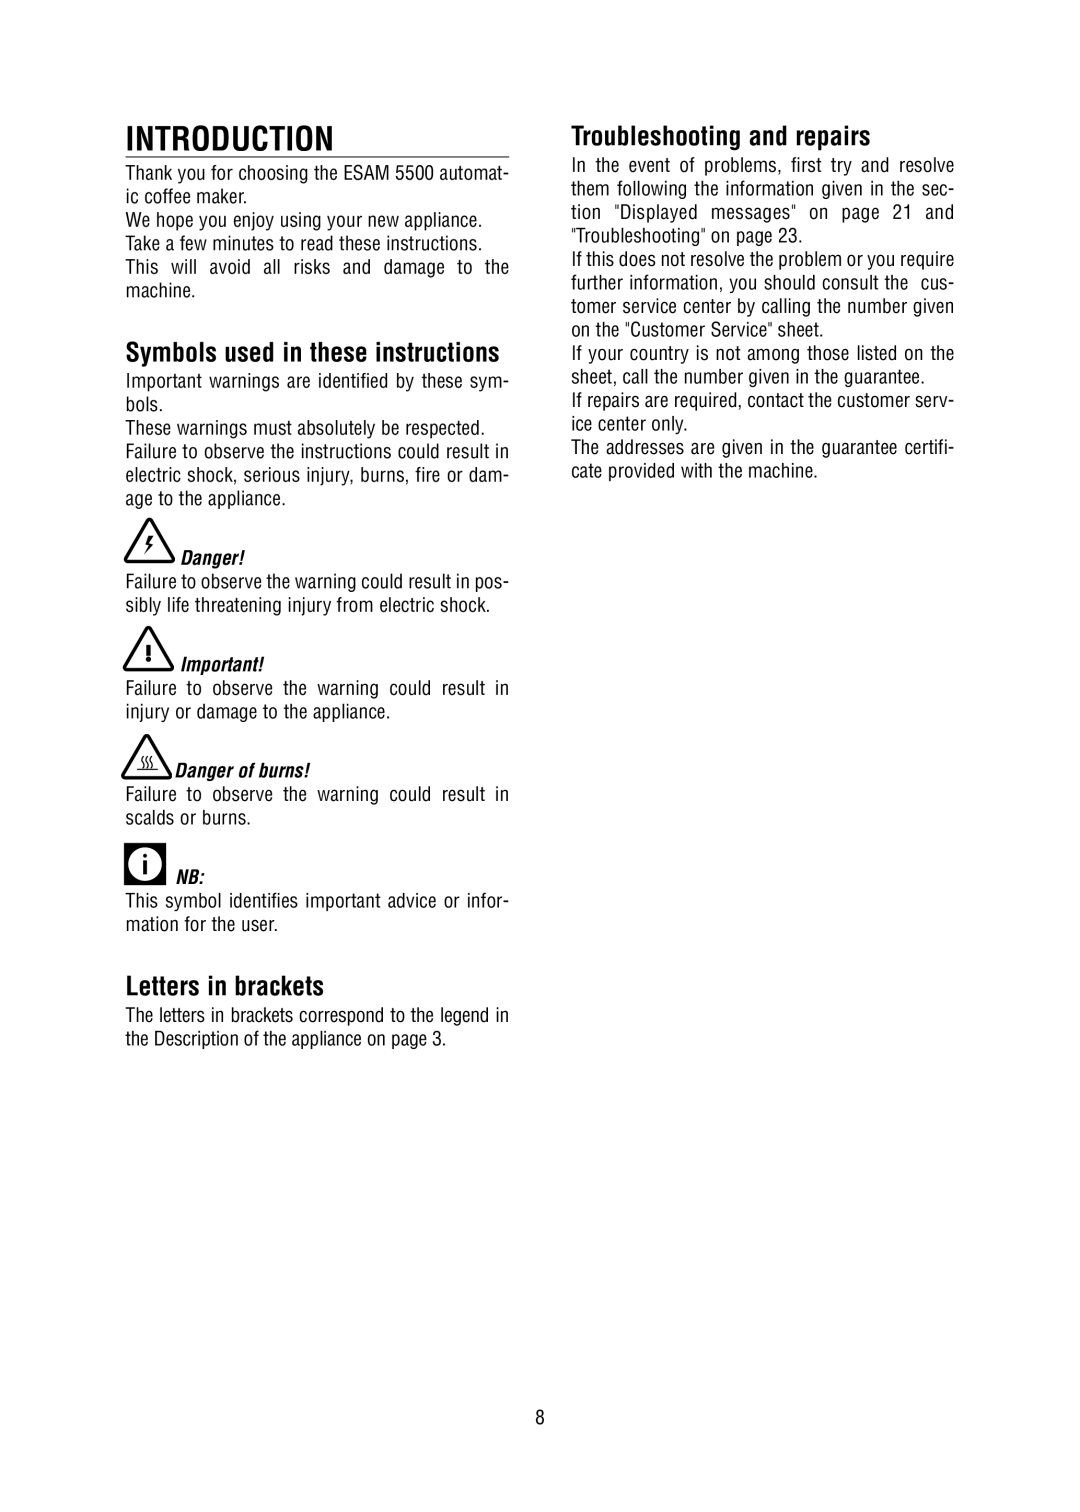 DeLonghi 5500 Introduction, Symbols used in these instructions, Letters in brackets, Troubleshooting and repairs, Danger 